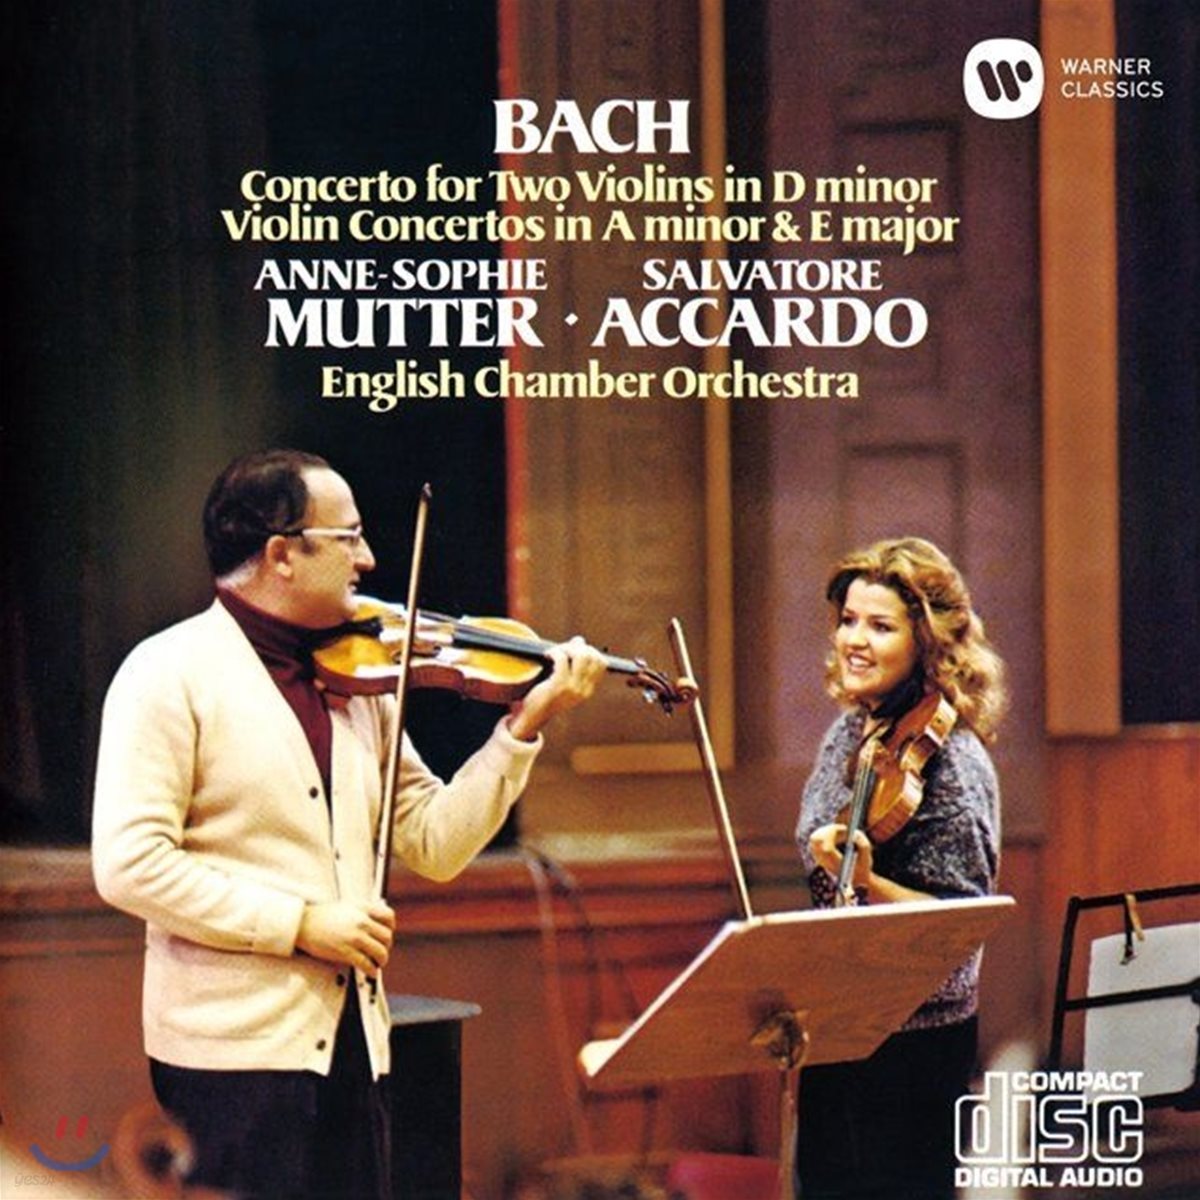 Anne-Sophie Mutter / Salvatore Accardo 바흐: 바이올린 협주곡 (Bach: Concerto For Two Violins)